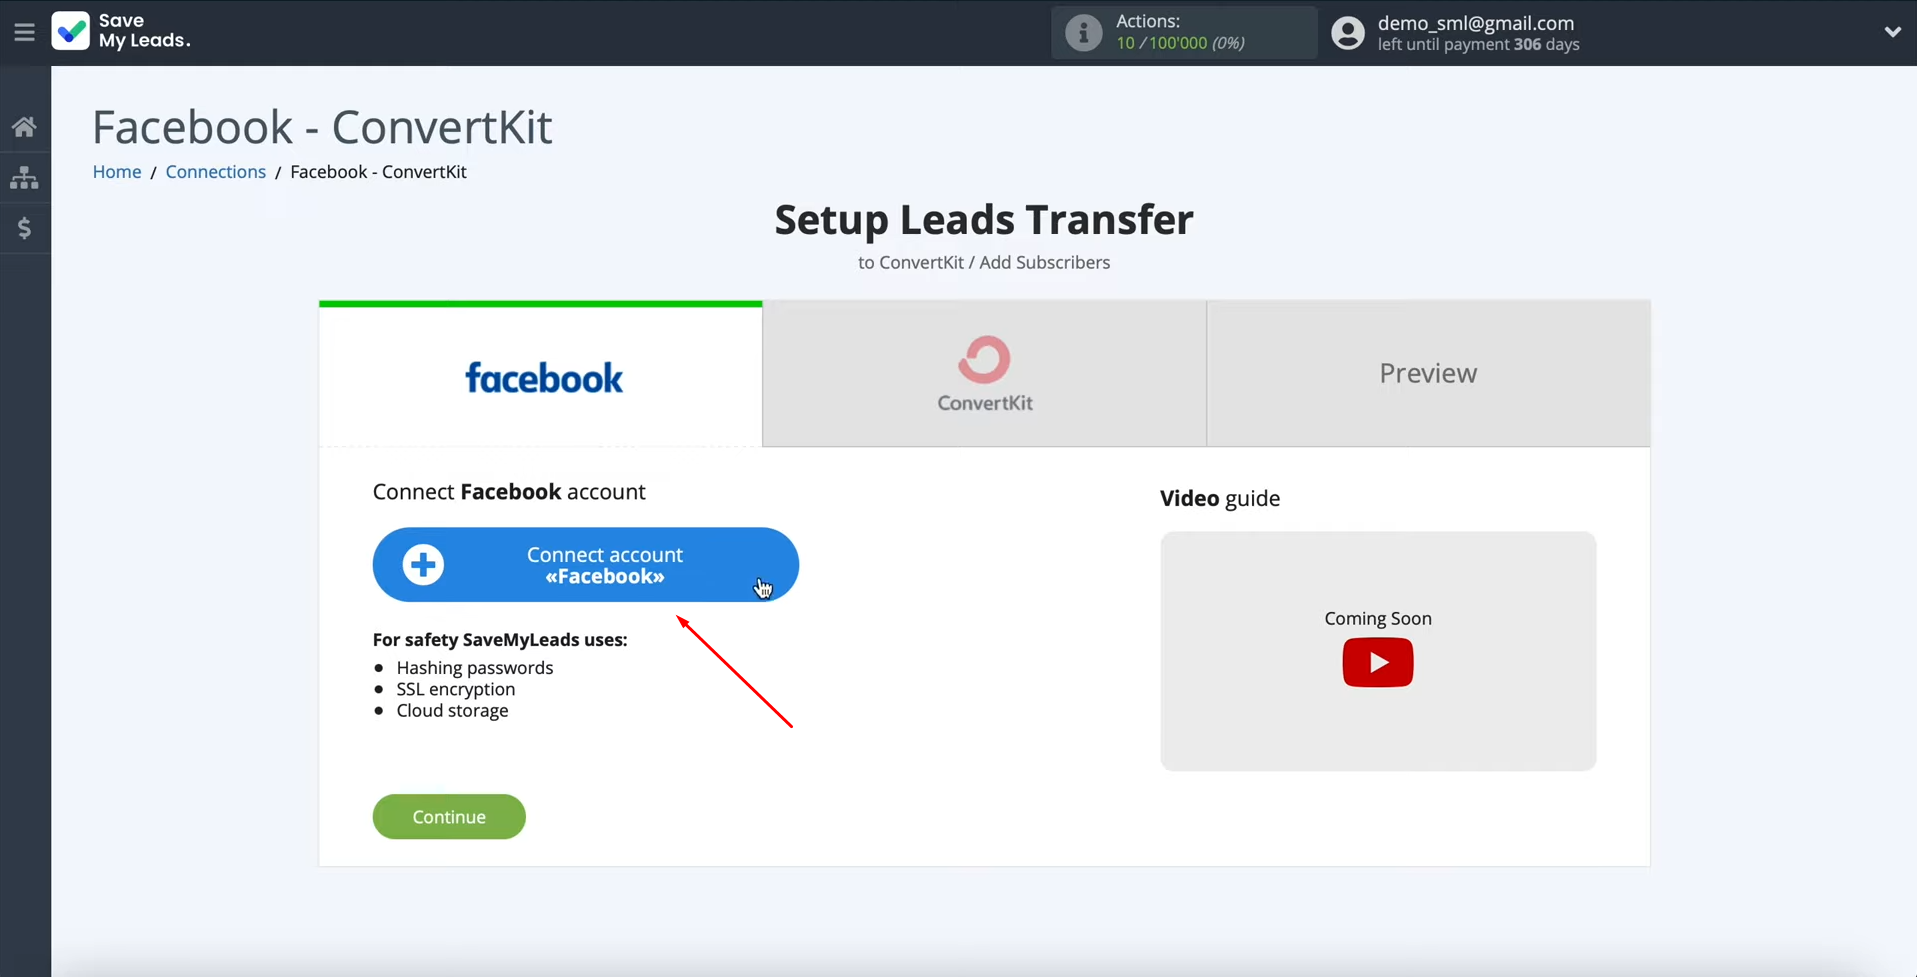 Facebook and ConvertKit integration | Connect your Facebook account 